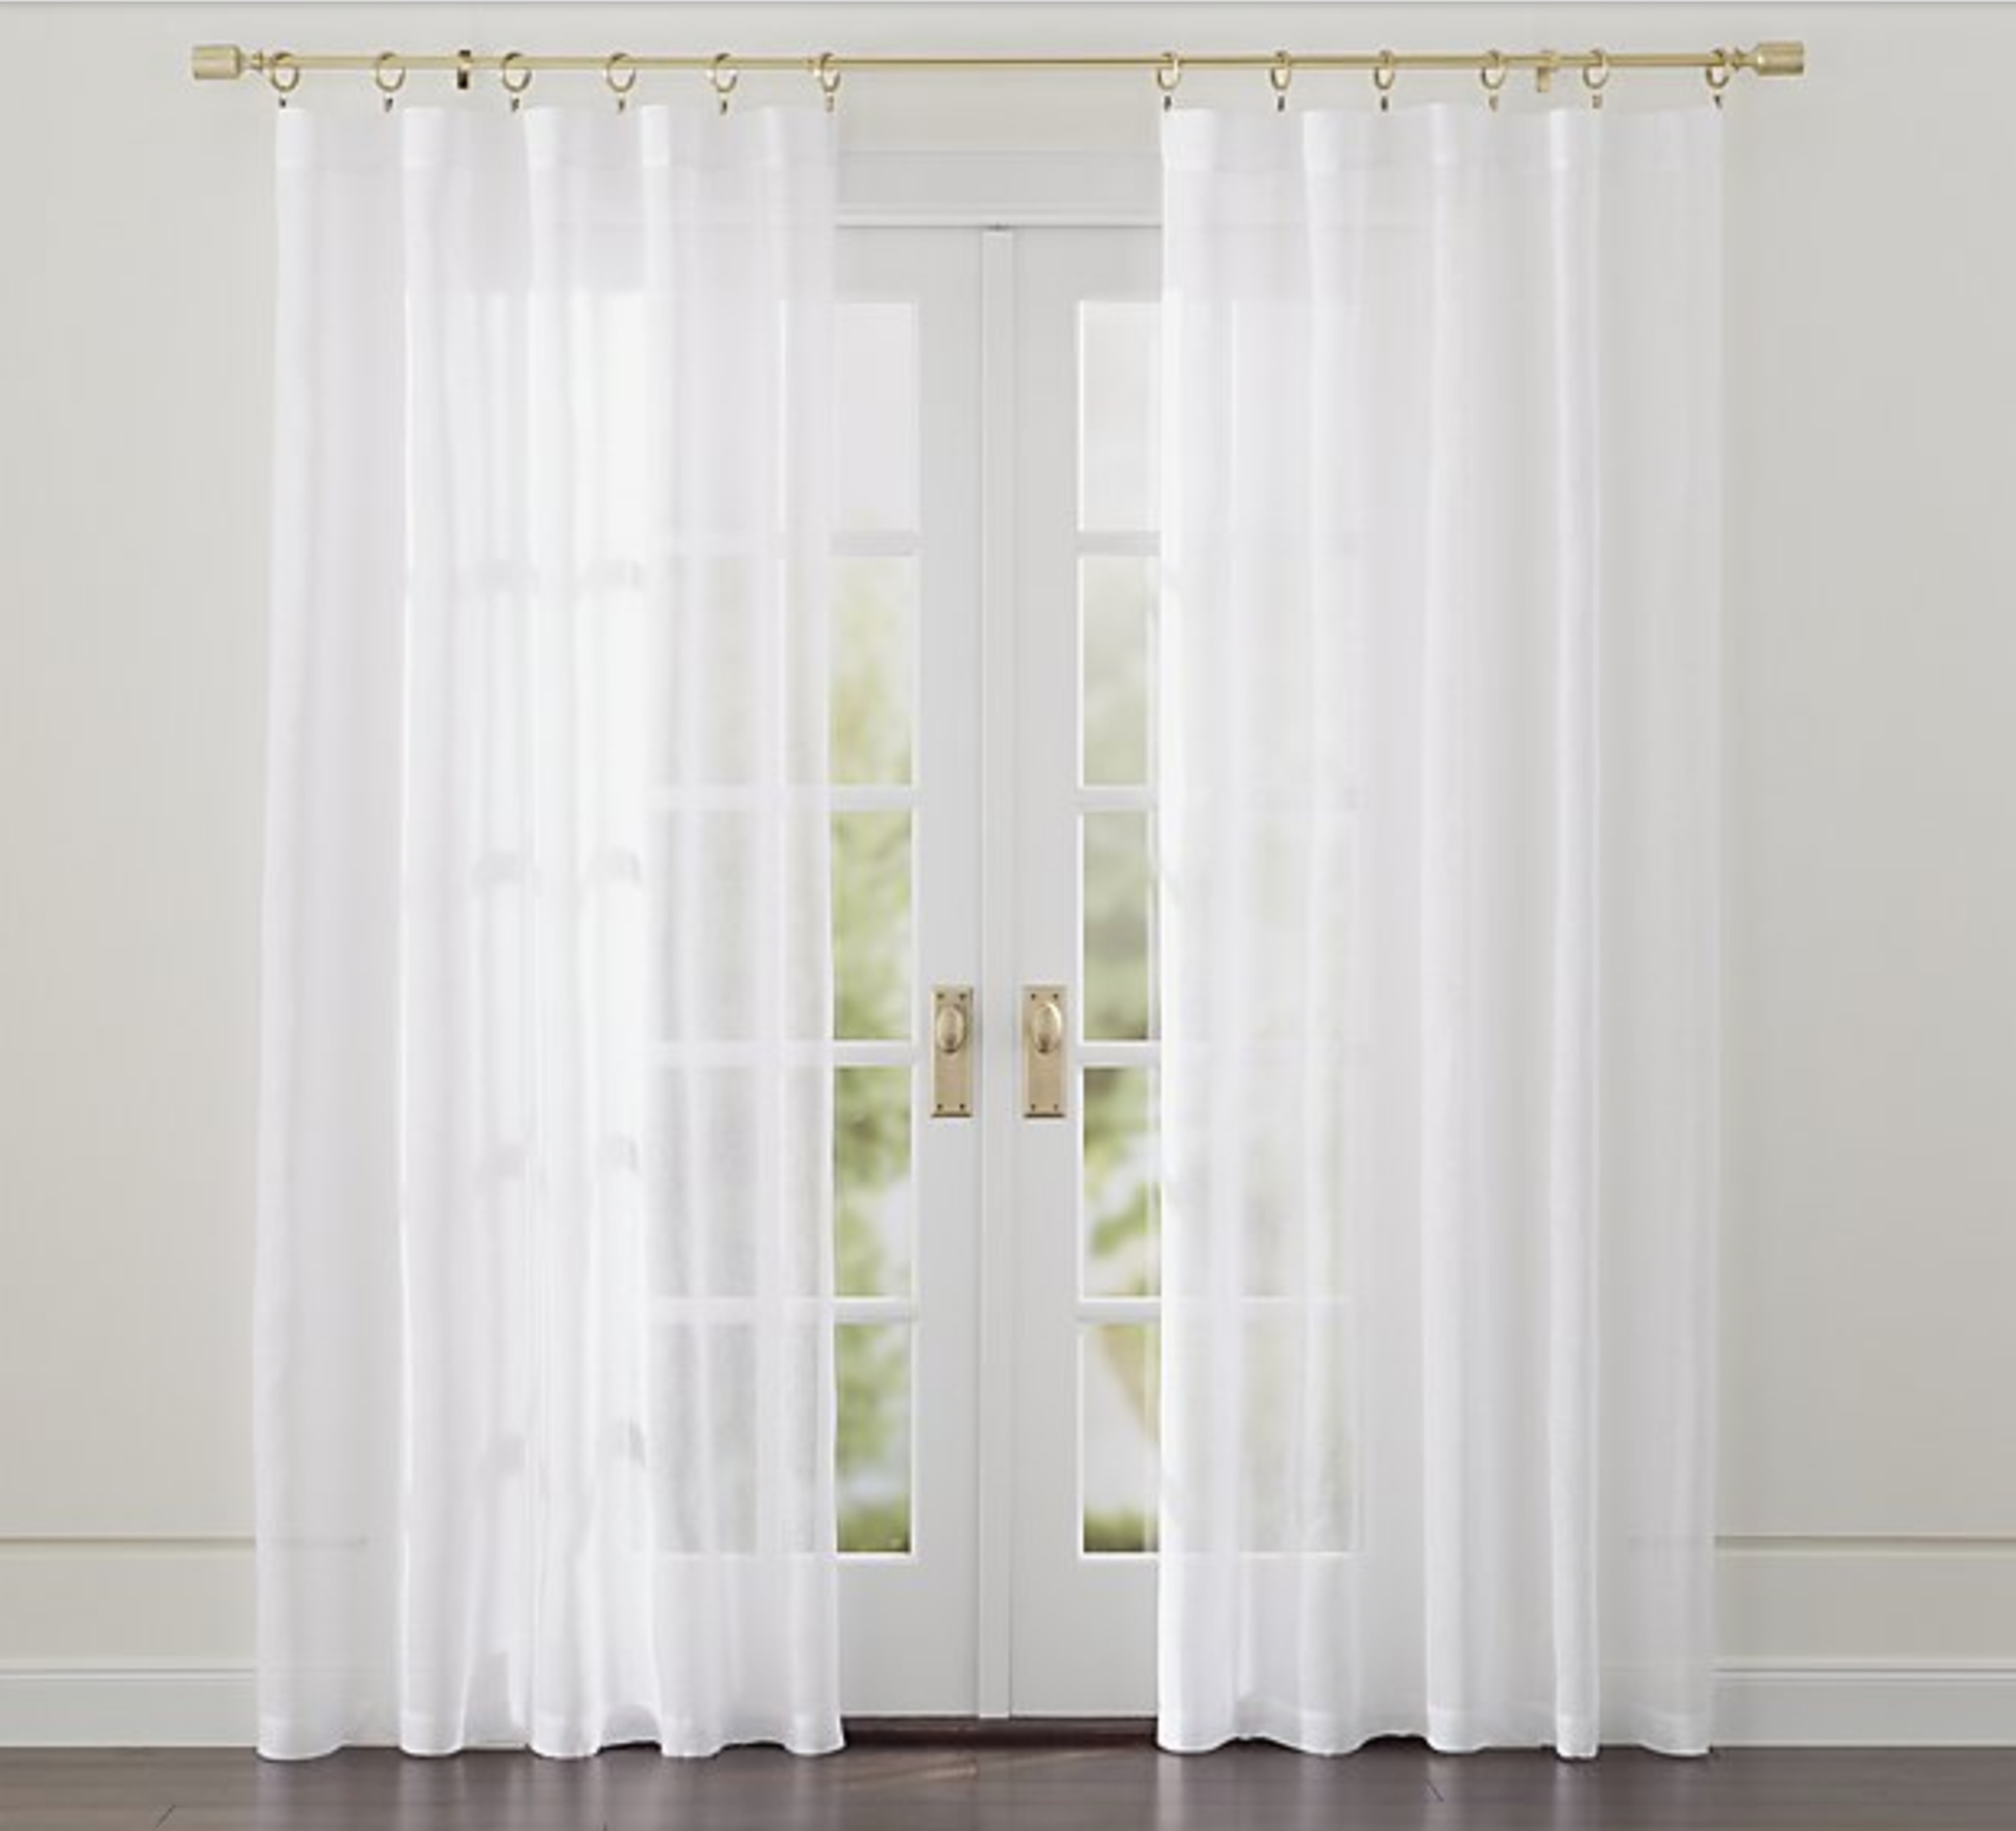 Linen Sheer 52"x96" White Curtain Panel - Crate and Barrel